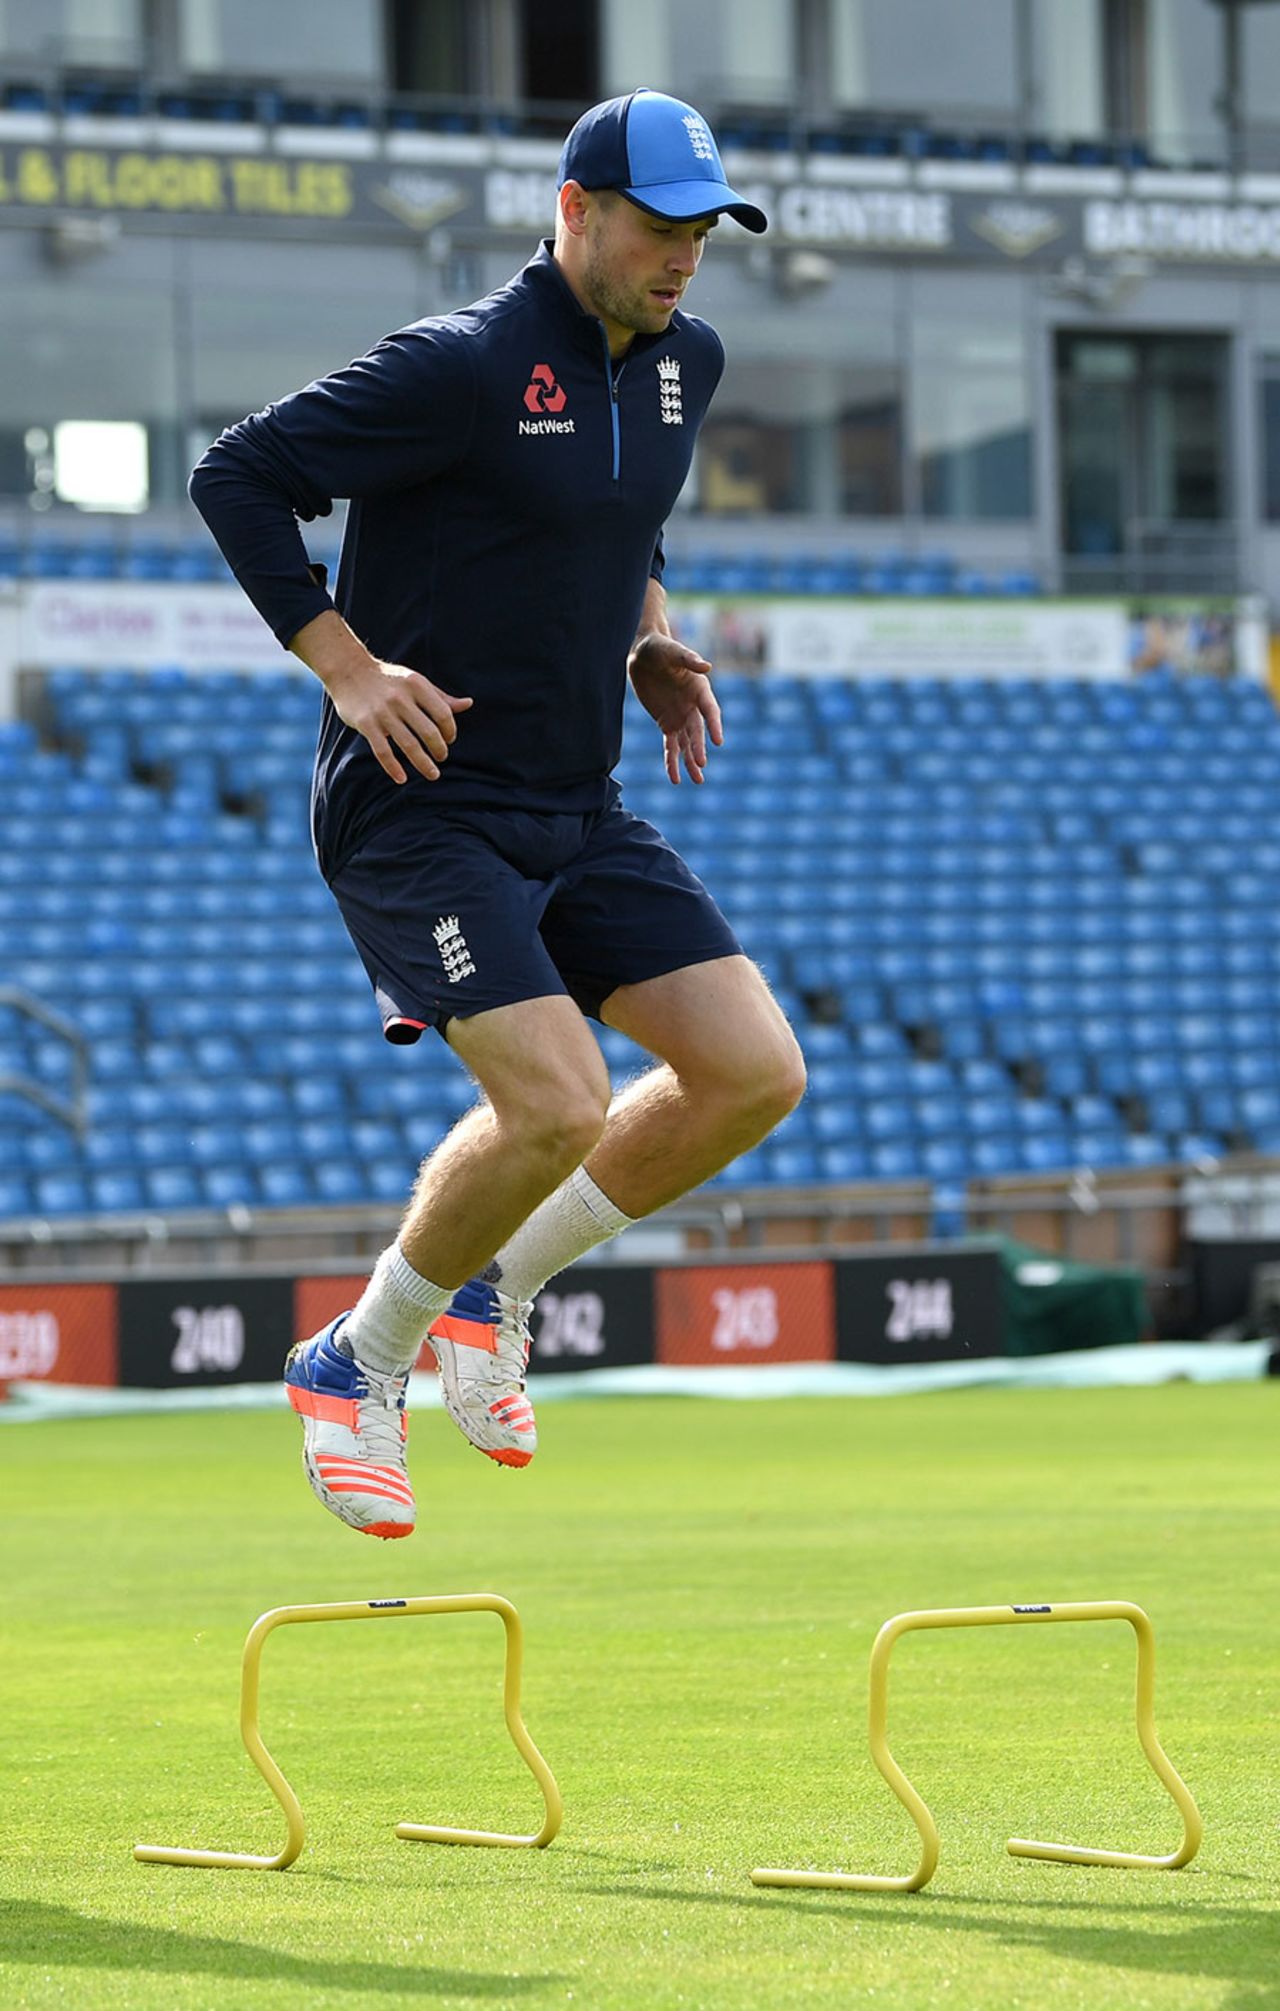 Chris Woakes returns to the England Test side, Headingley, August 24, 2017